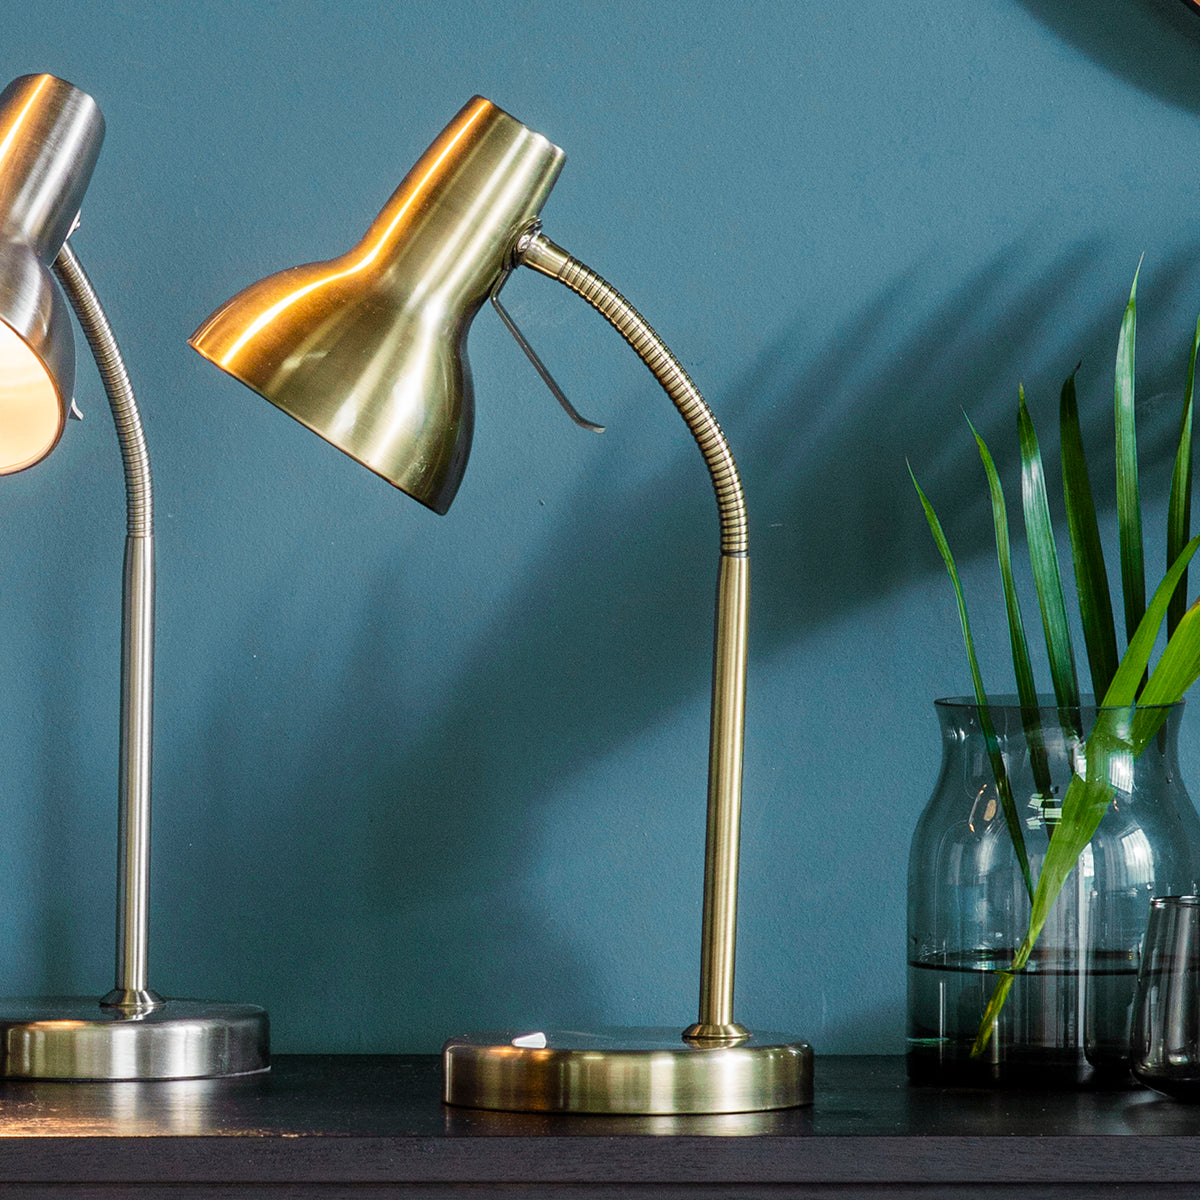 Two Antique Brass USB Table Lamps on a table in front of a blue wall, enhancing interior decor.